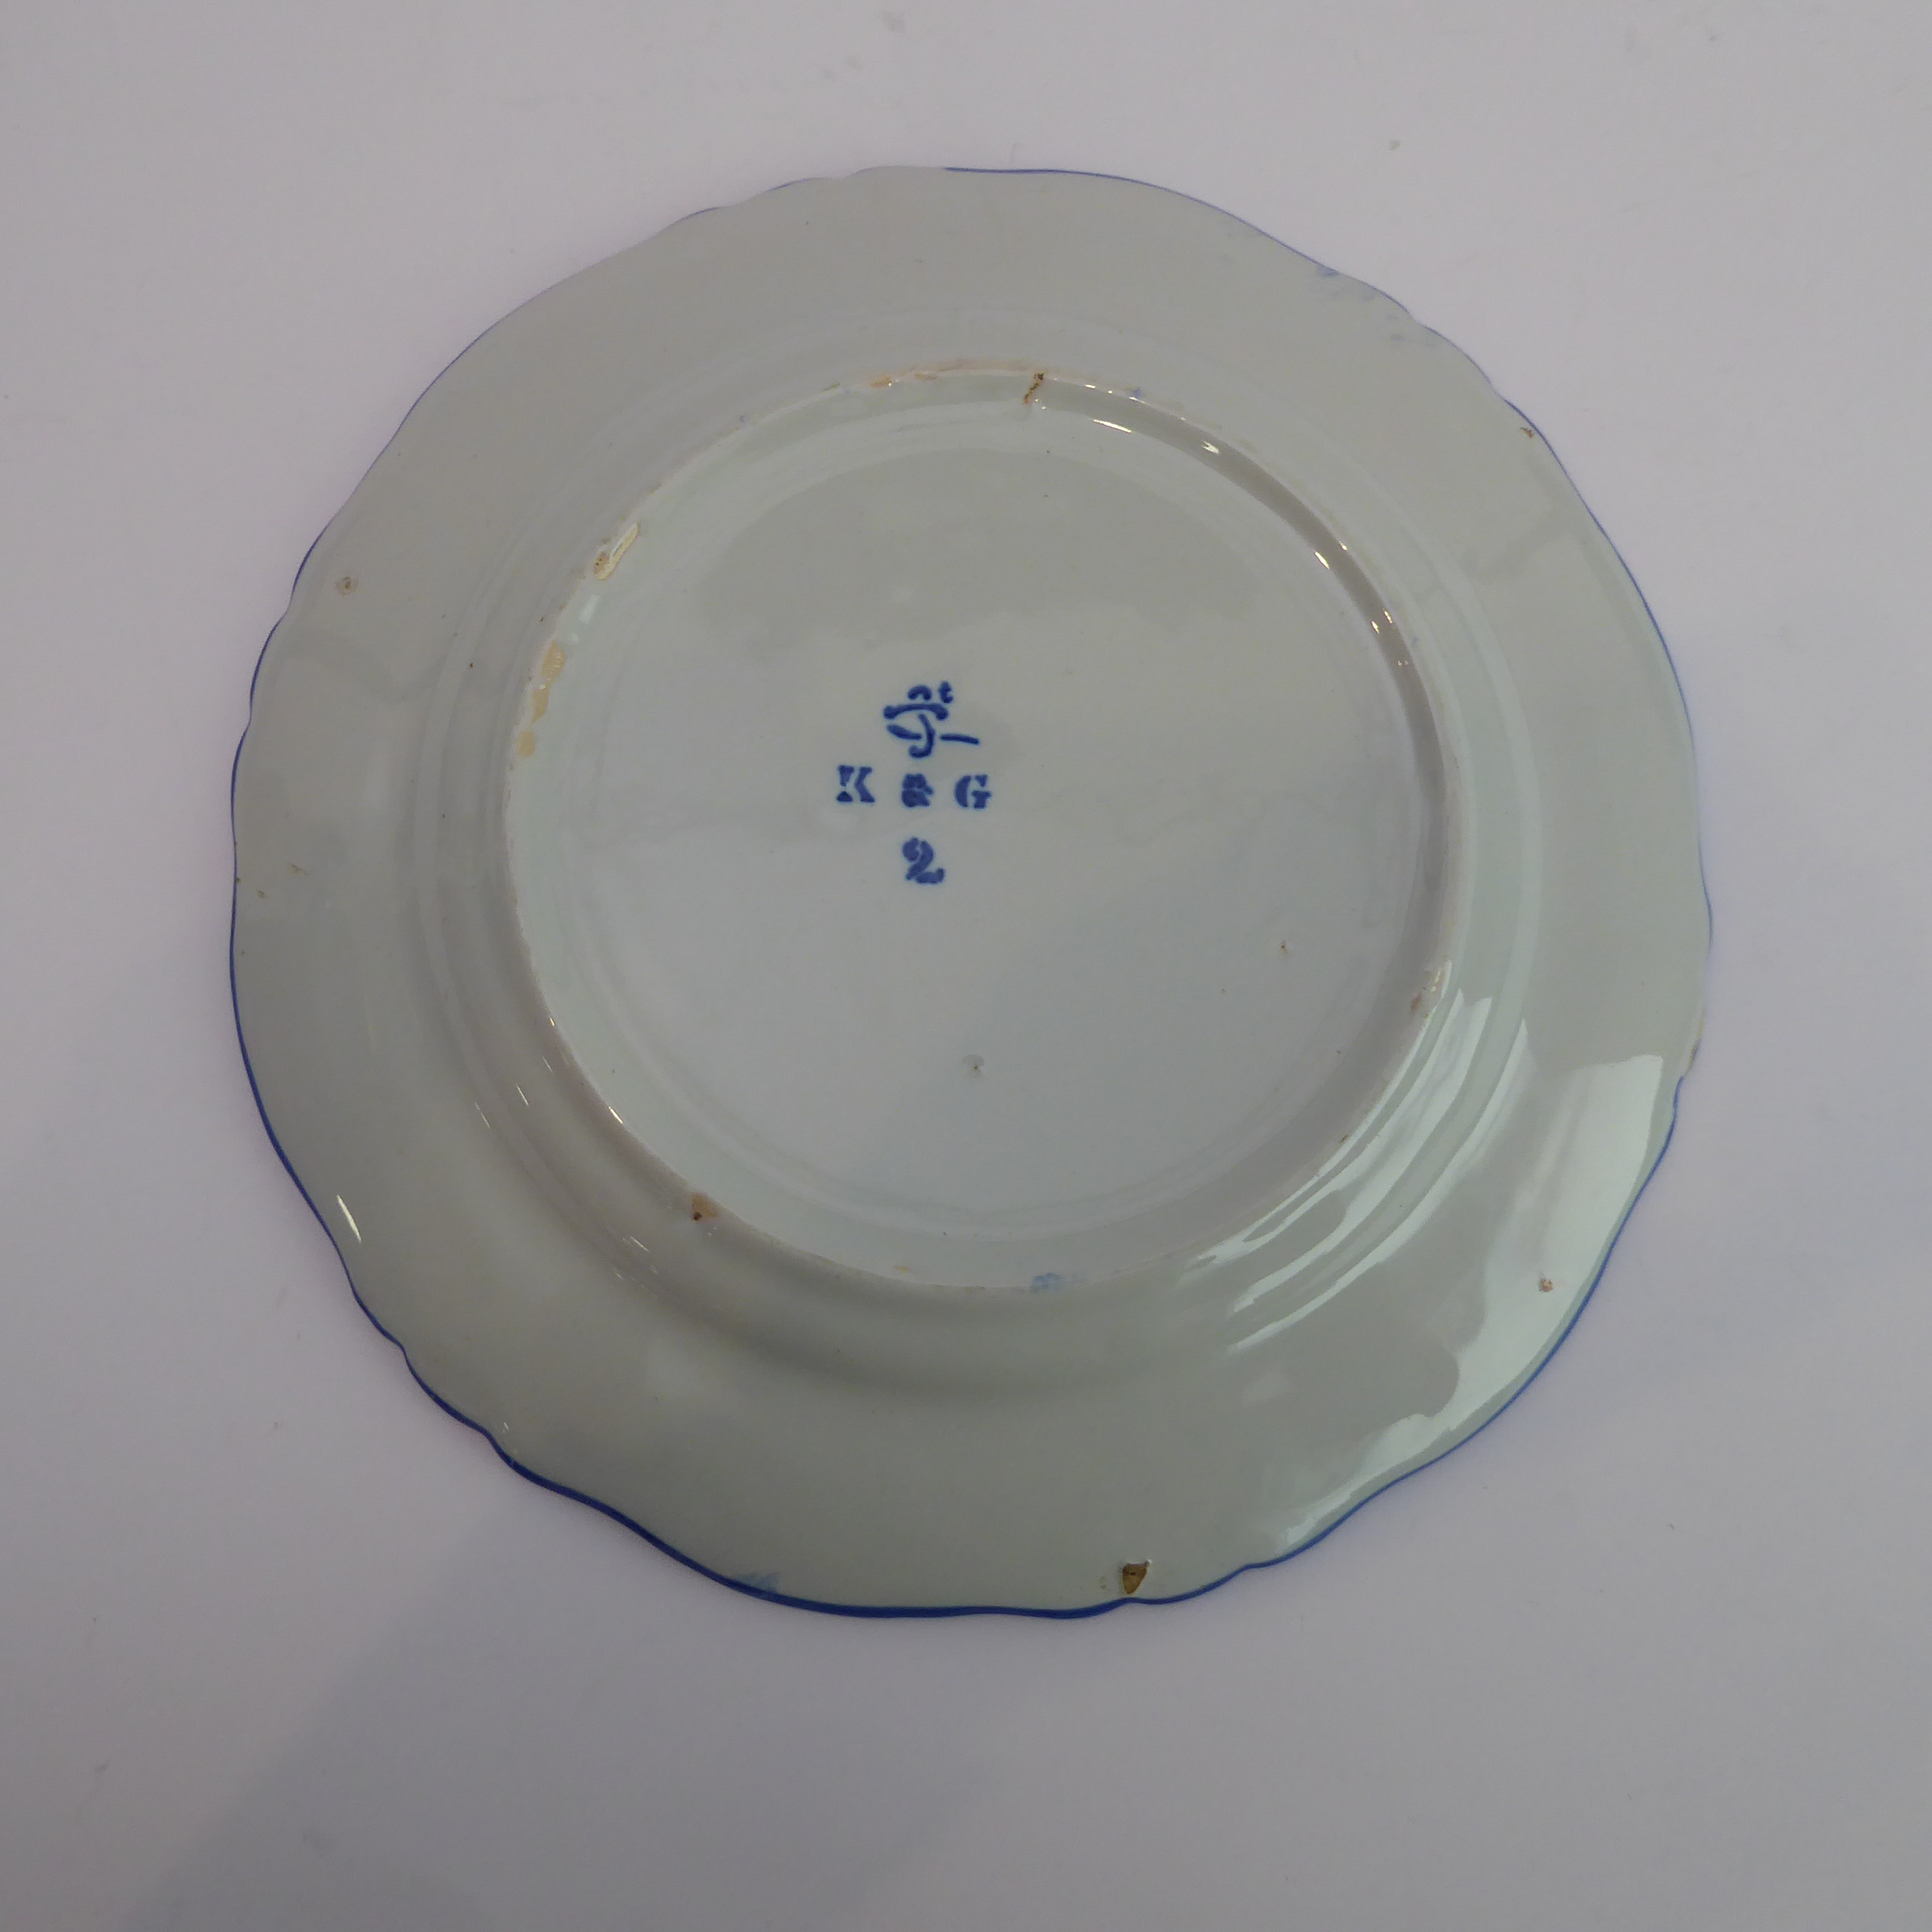 A set of eleven 19th century faience plates by Keller & Guerin at Luneville (early marks). (The - Image 9 of 17